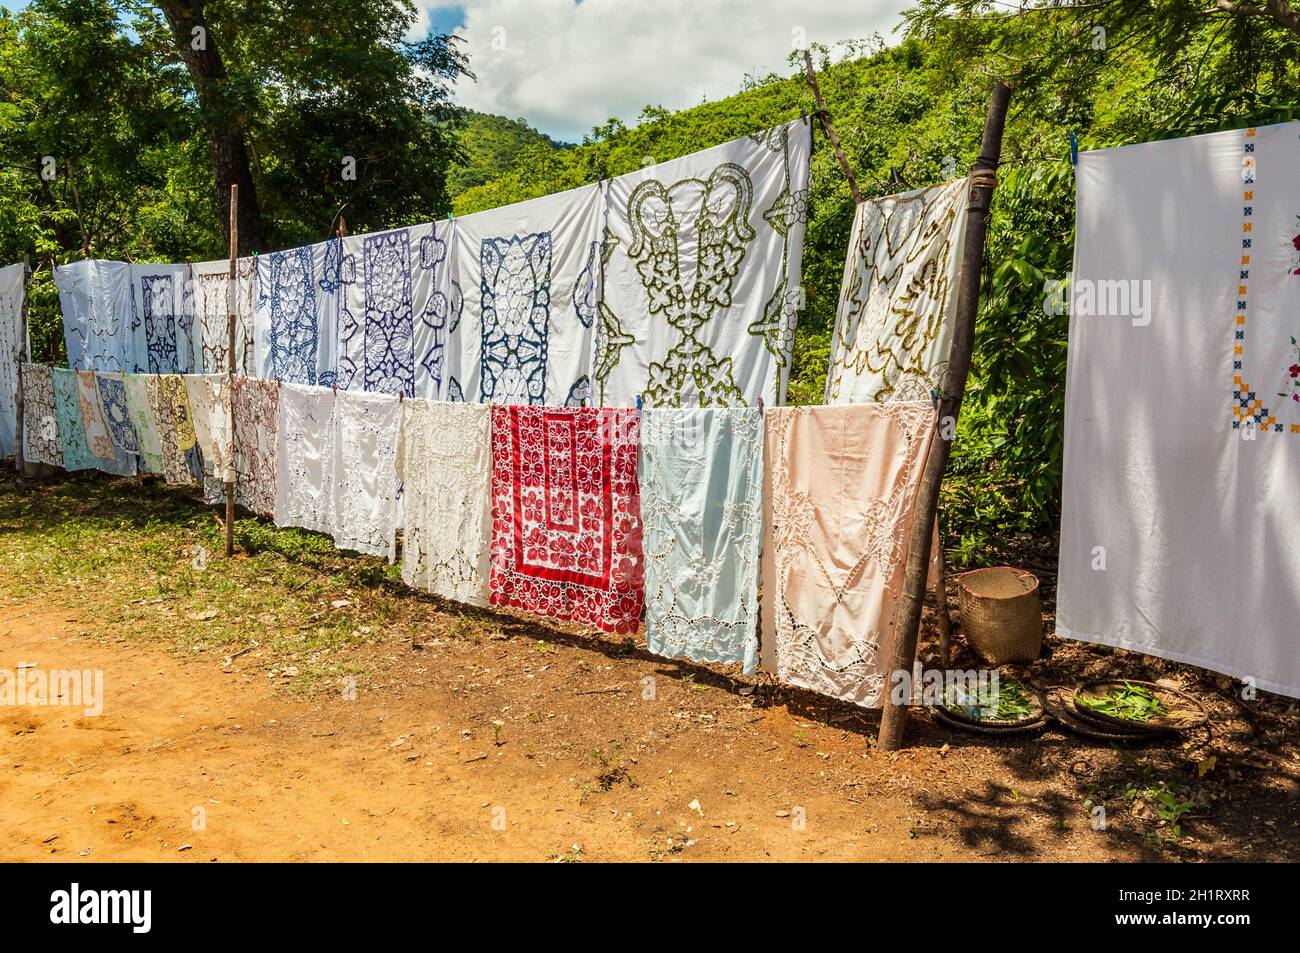 Ampasipohy, Nosy Be, Madagascar - December 19, 2015: Selling embroidered tablecloths in the village of the Ampasipohy, Nosy Be Island, Madagascar. It Stock Photo